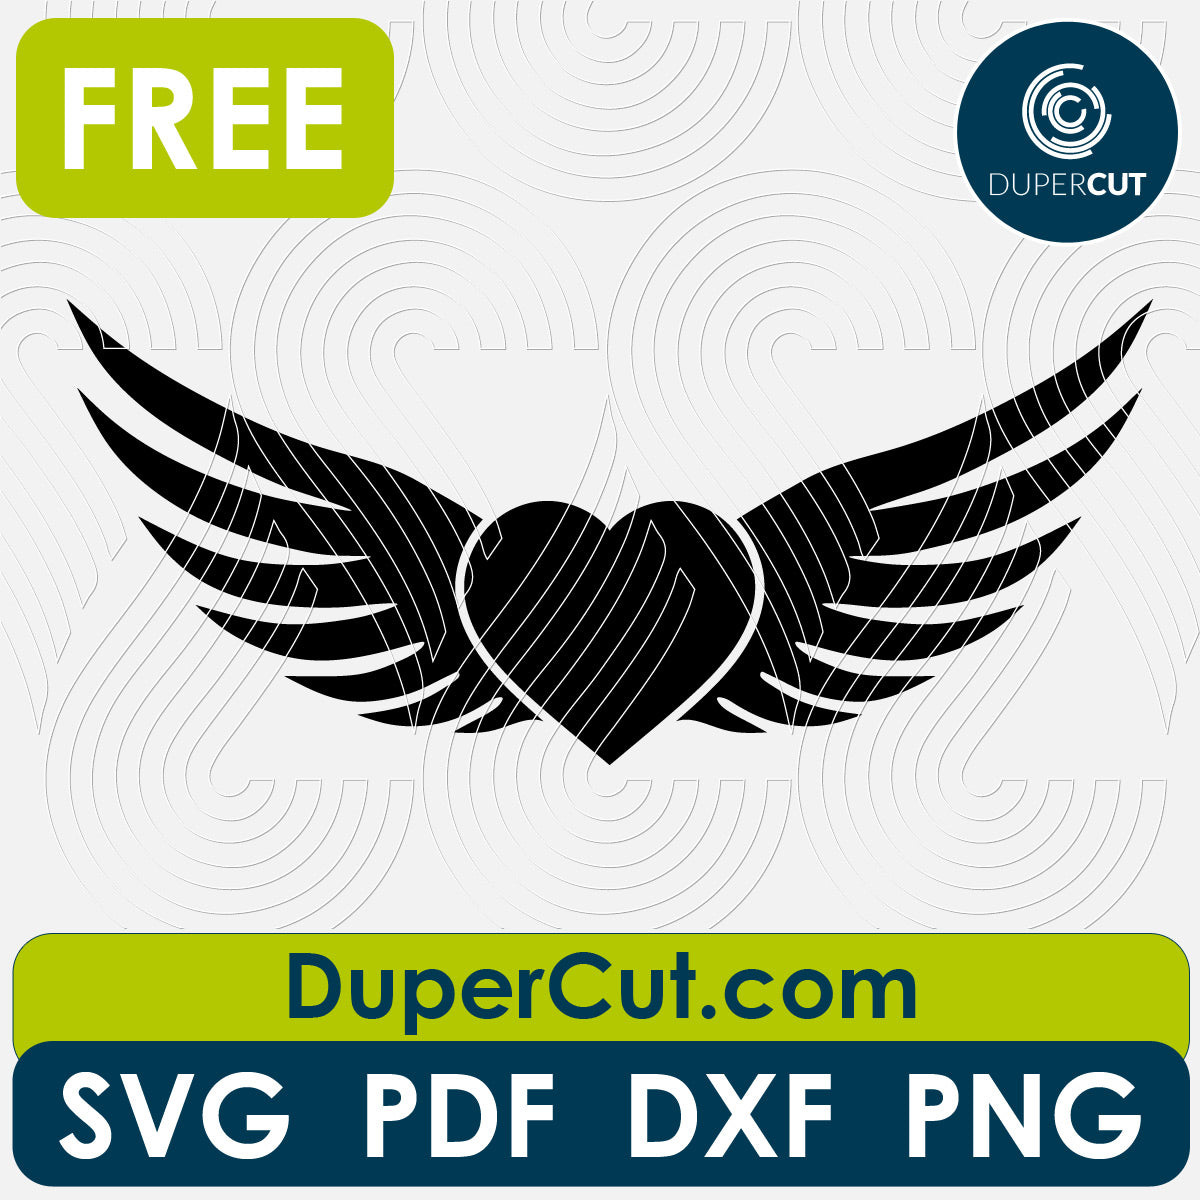 Winged heart shape free cutting template SVG PNG DXF files for Glowforge, Cricut, Silhouette, CNC laser router by DuperCut.com